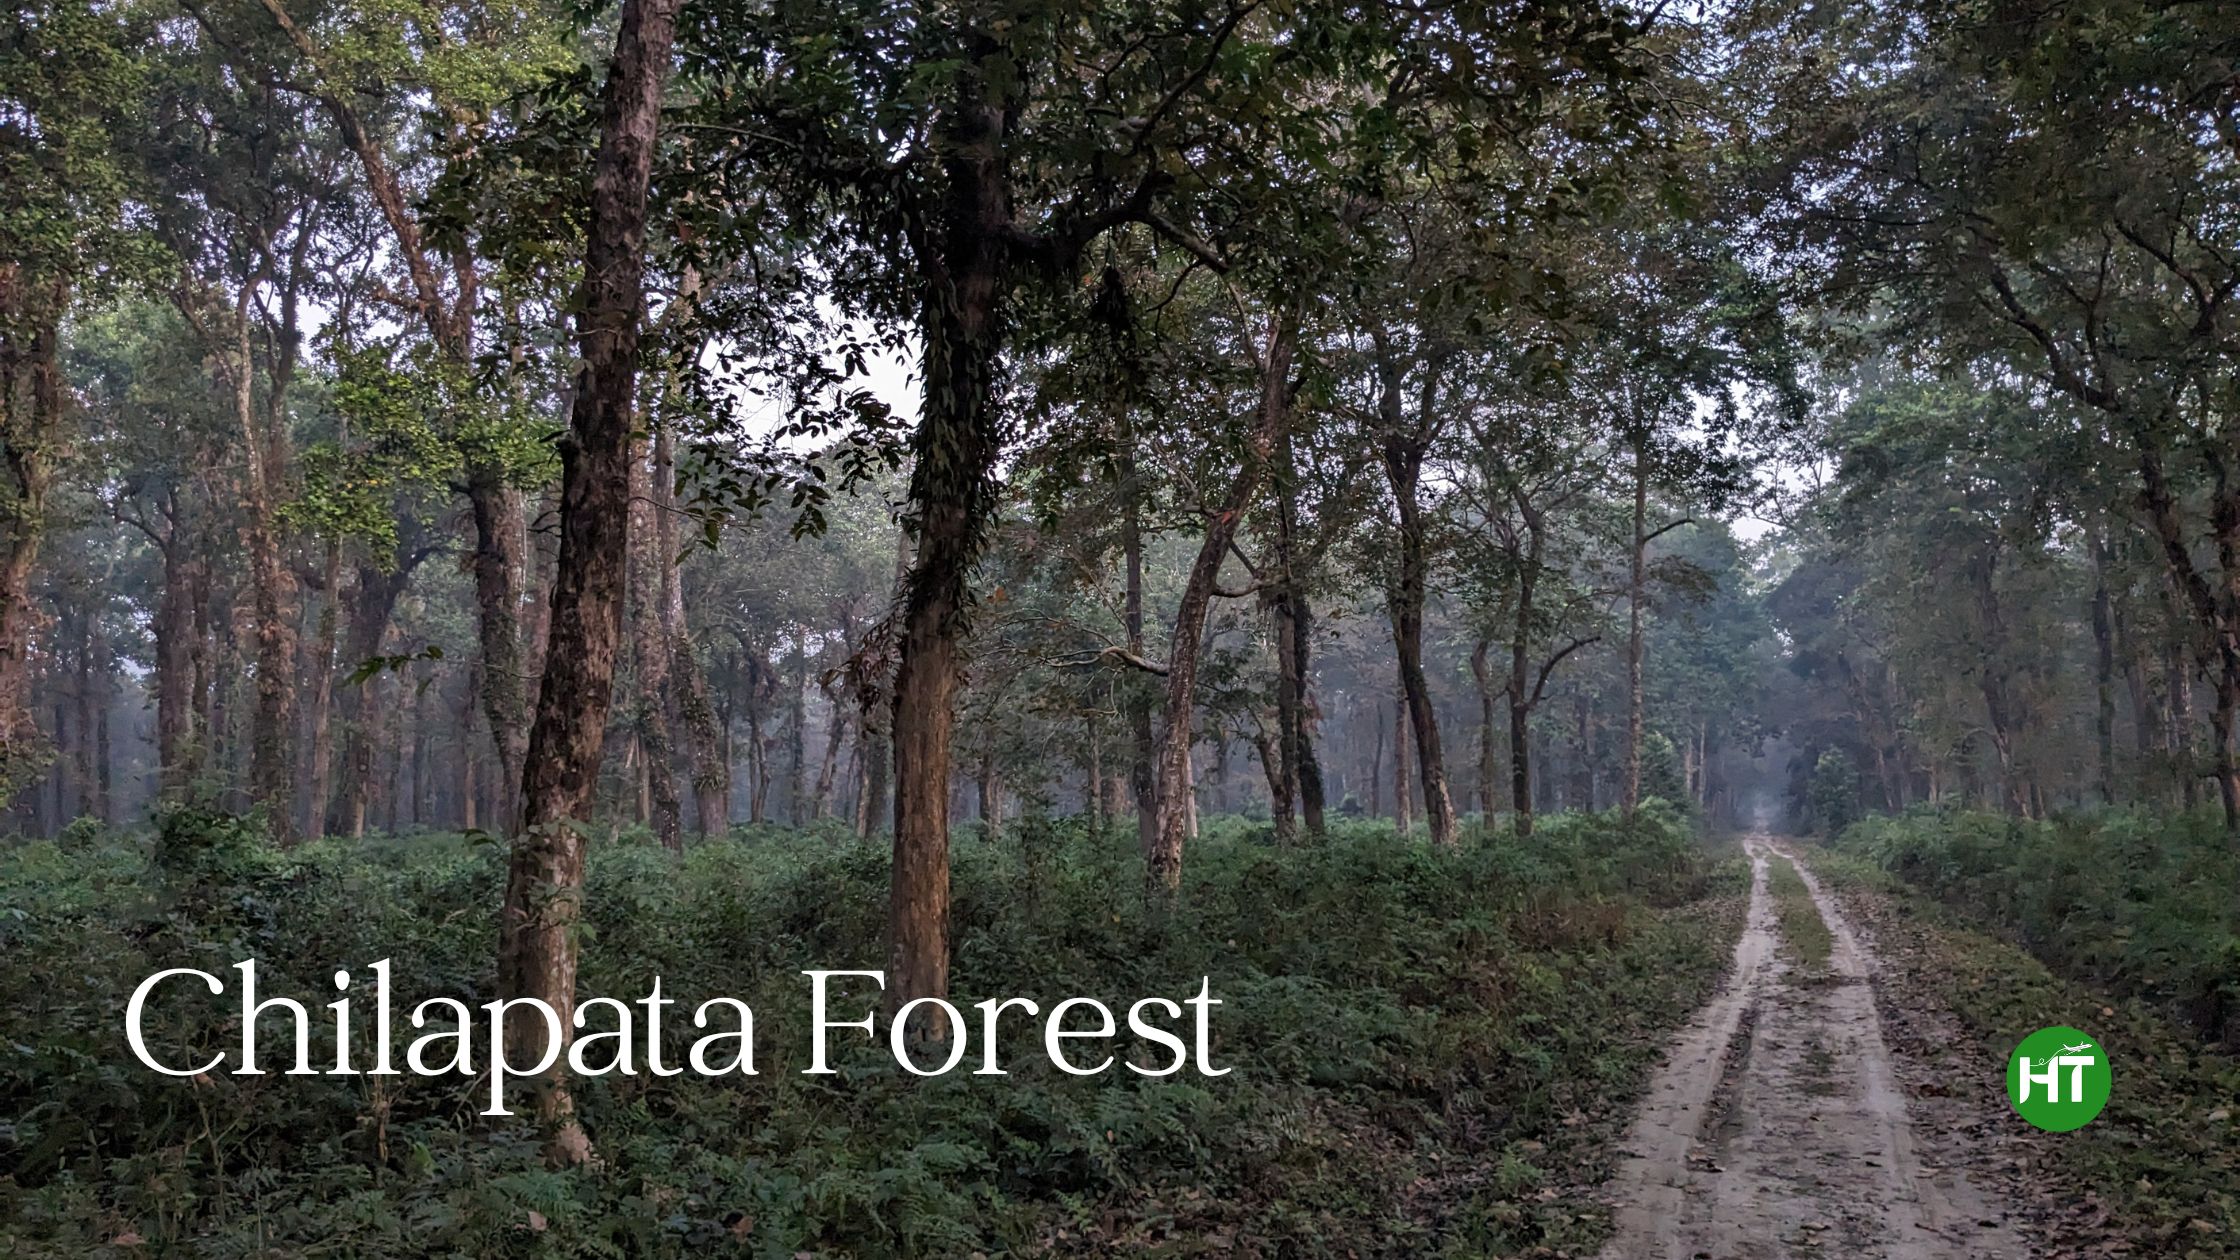 Chilapata forest